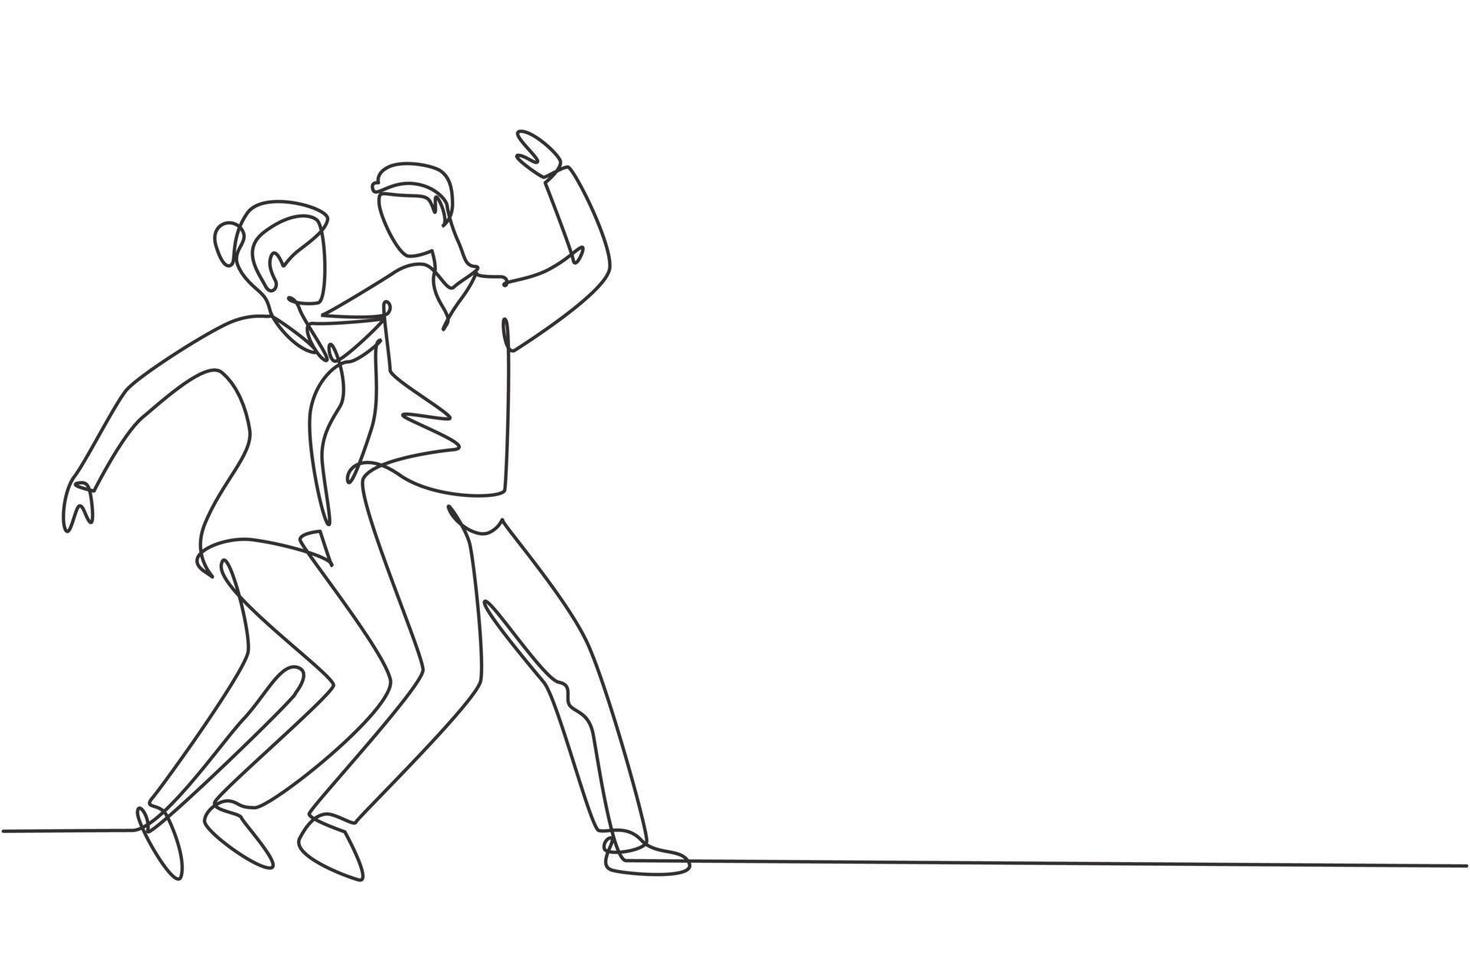 Single one line drawing people dancing salsa. Couples, man and woman in  dance. Pairs of dancers with waltz tango and salsa styles moves. Modern  continuous line draw design graphic vector illustration 4482407